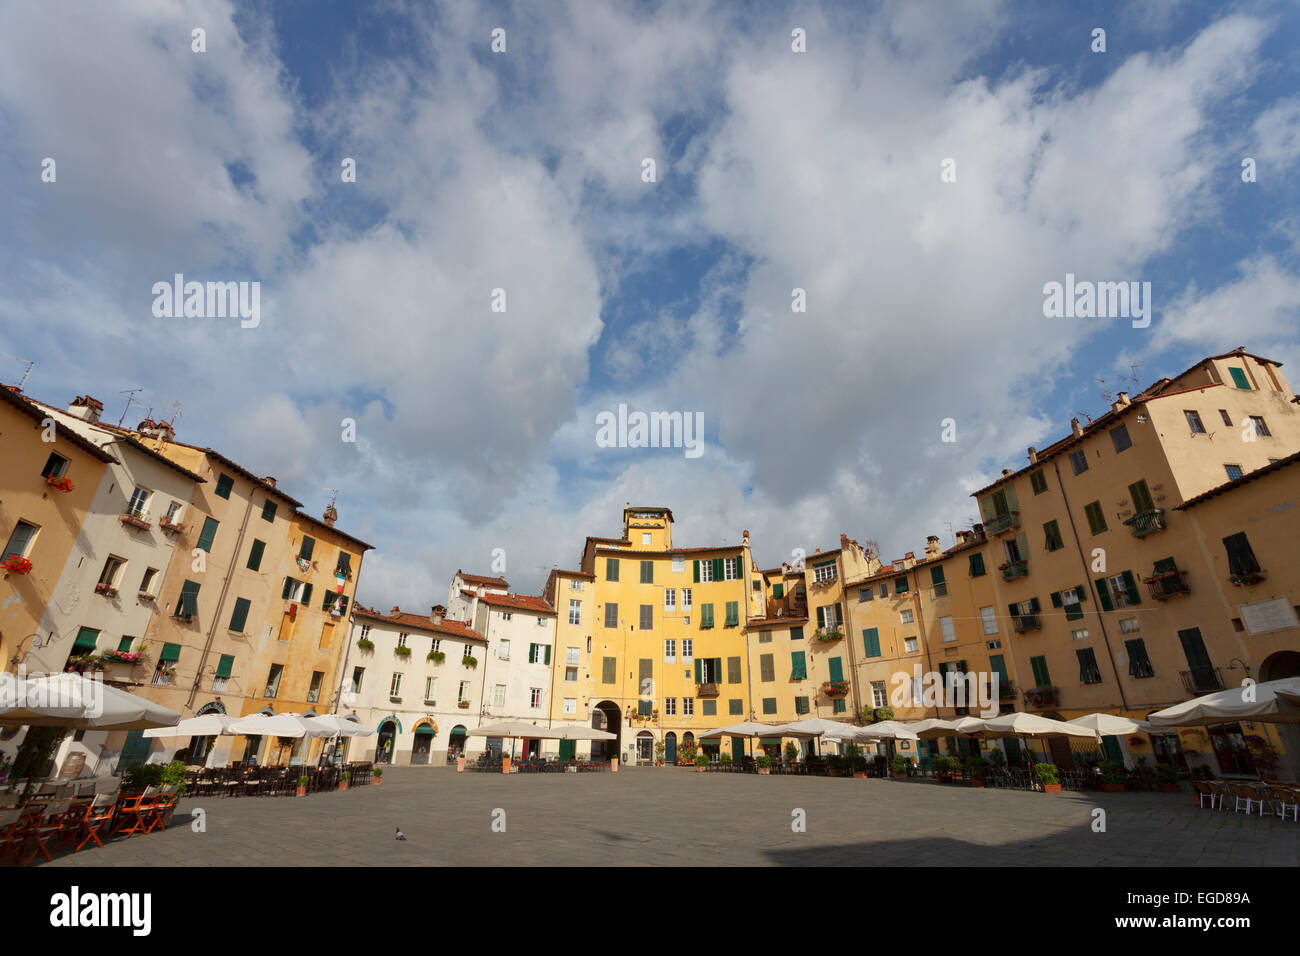 Piazza dell Anfiteatro square with restaurants in the historic centre of Lucca, UNESCO World Heritage Site, Tuscany, Italy, Europe Stock Photo